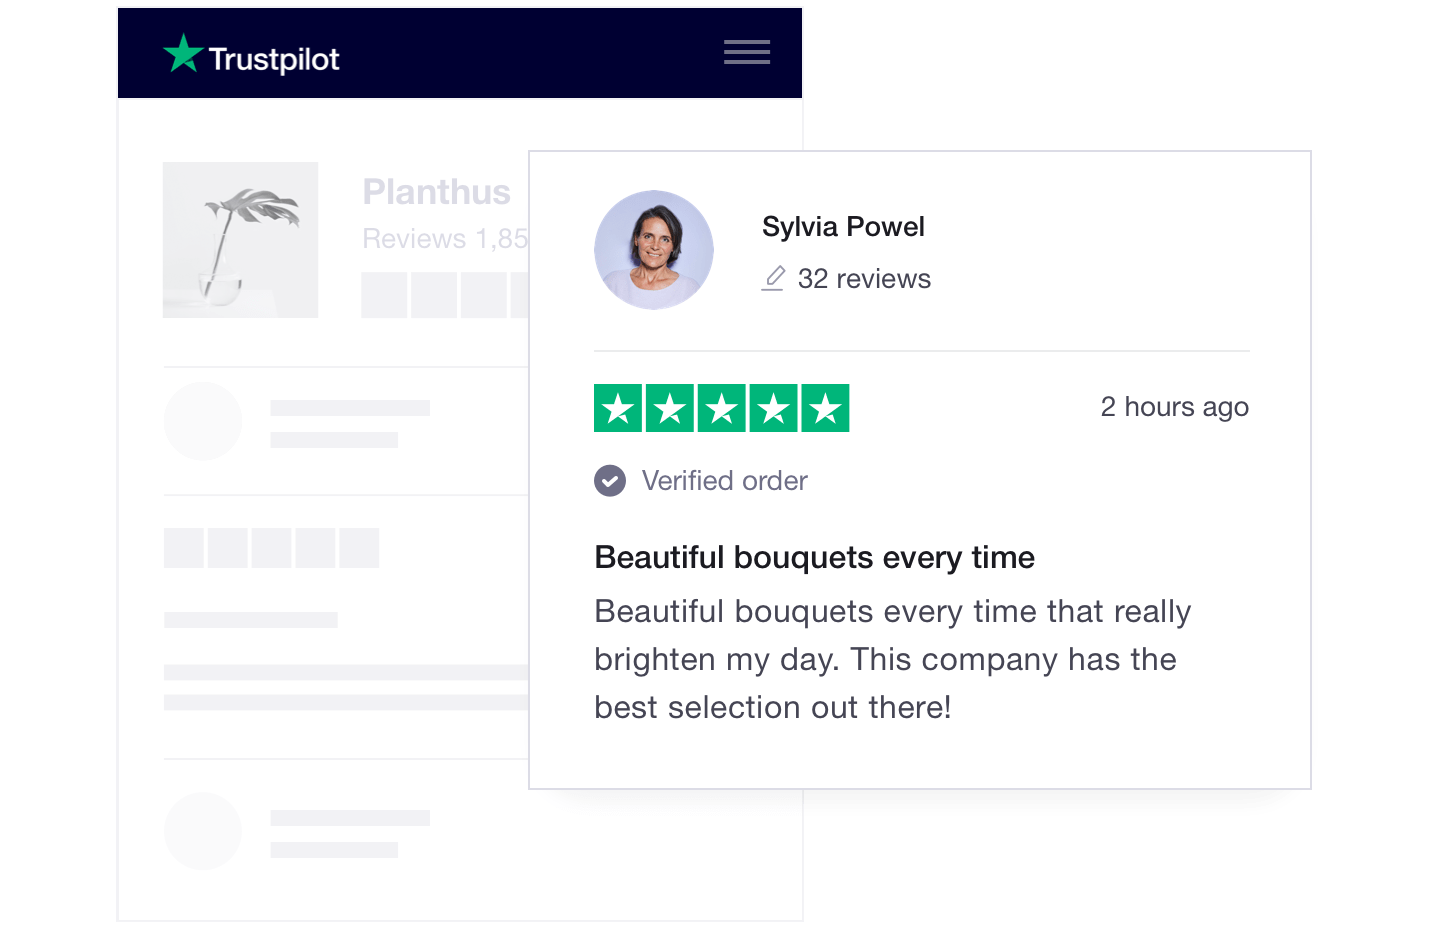 Illustration of a Trustpilot company profile page with a review